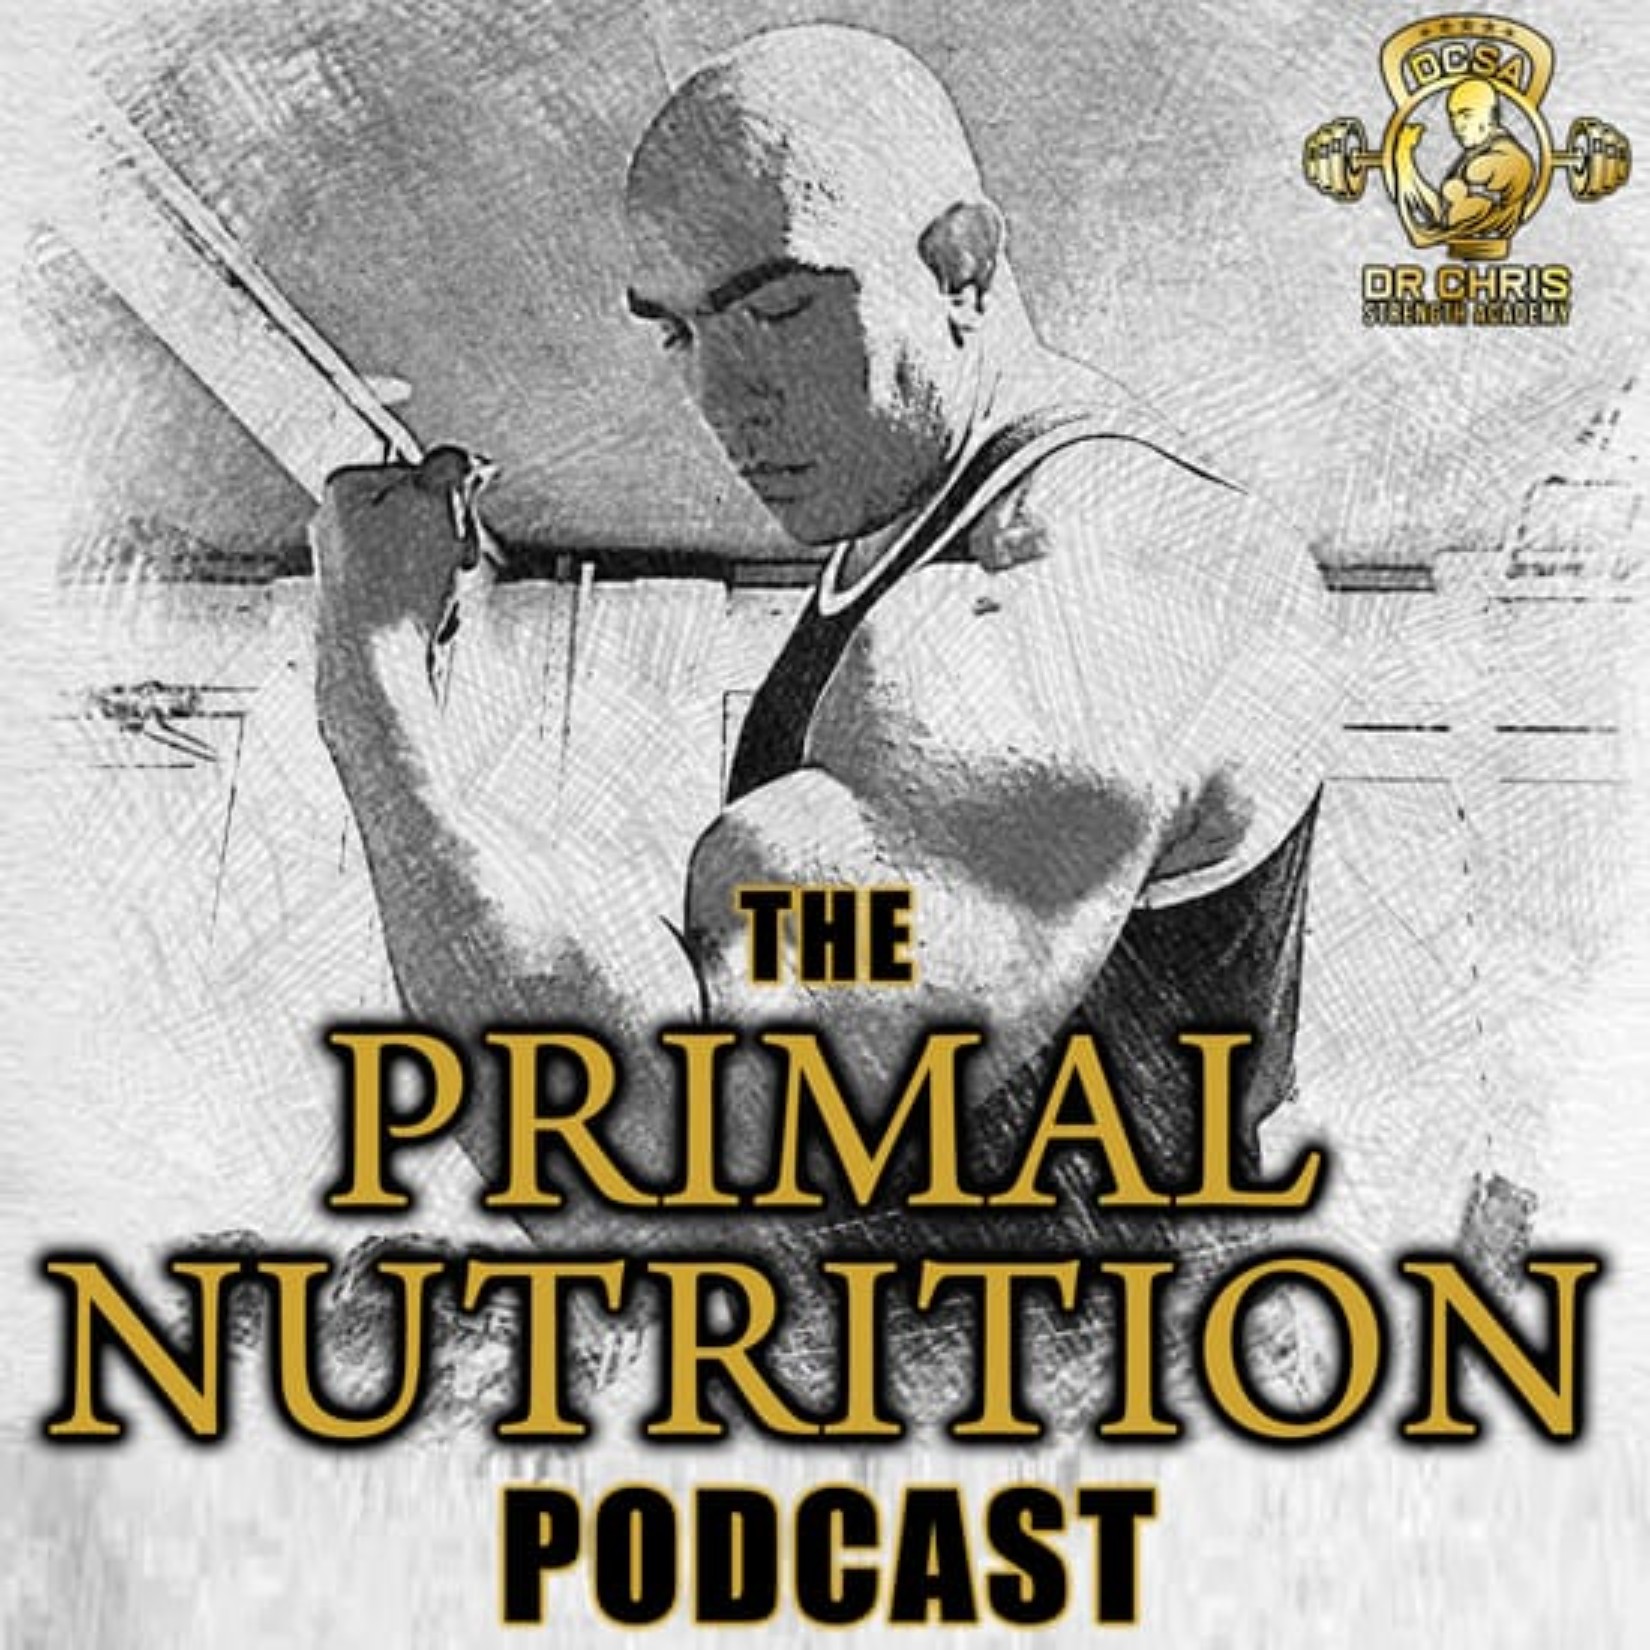 The Primal Nutrition Podcast